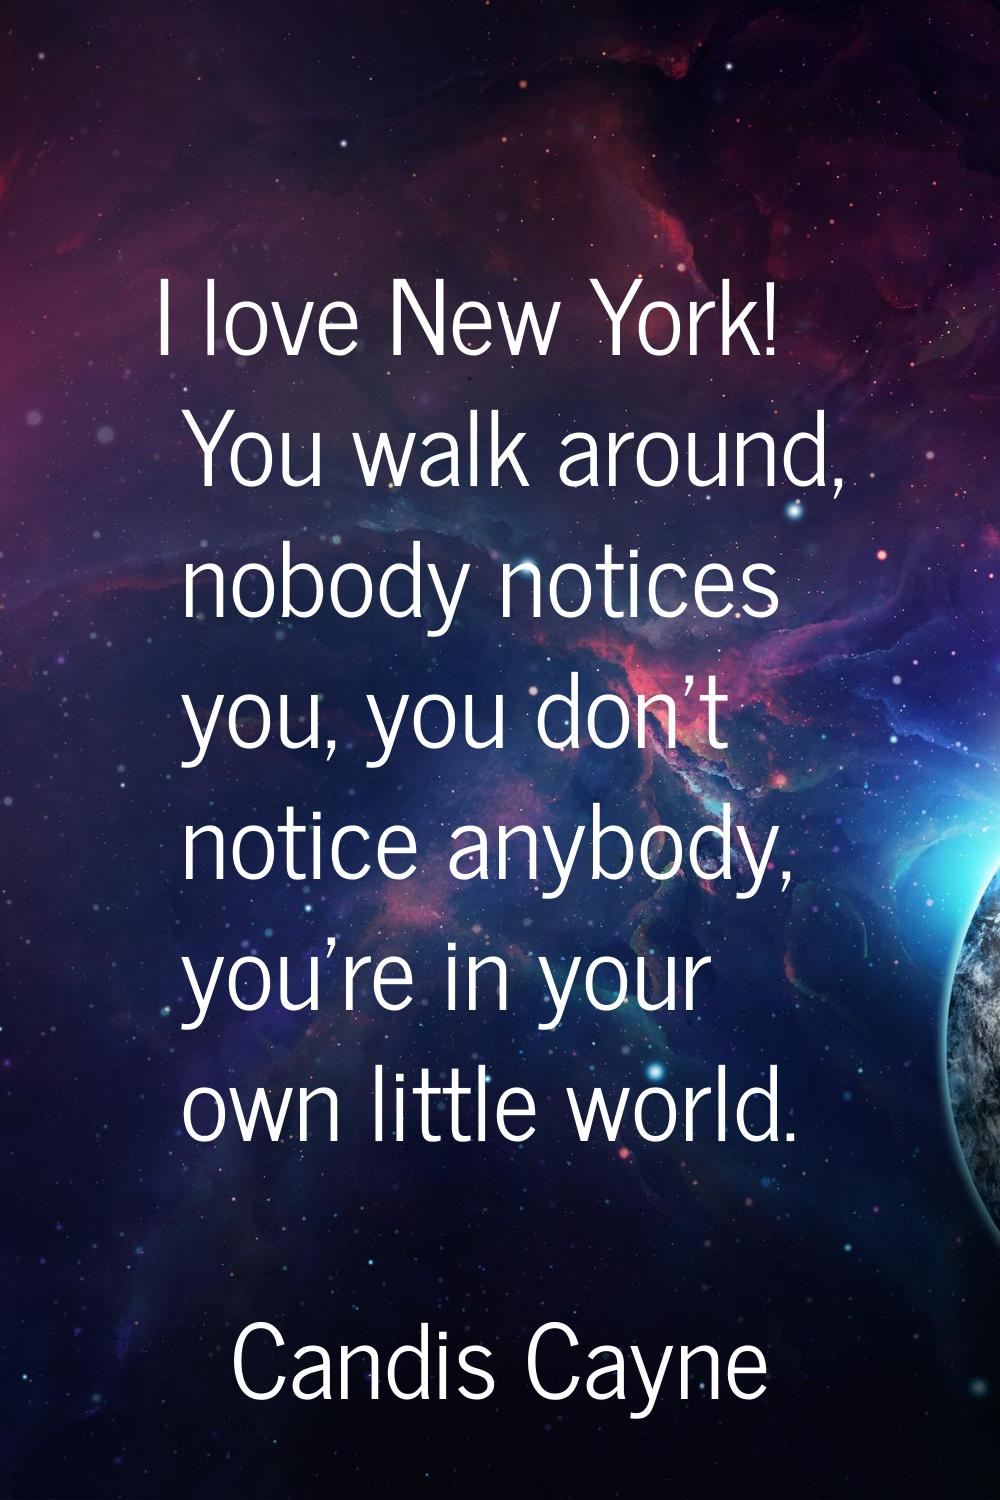 I love New York! You walk around, nobody notices you, you don't notice anybody, you're in your own 